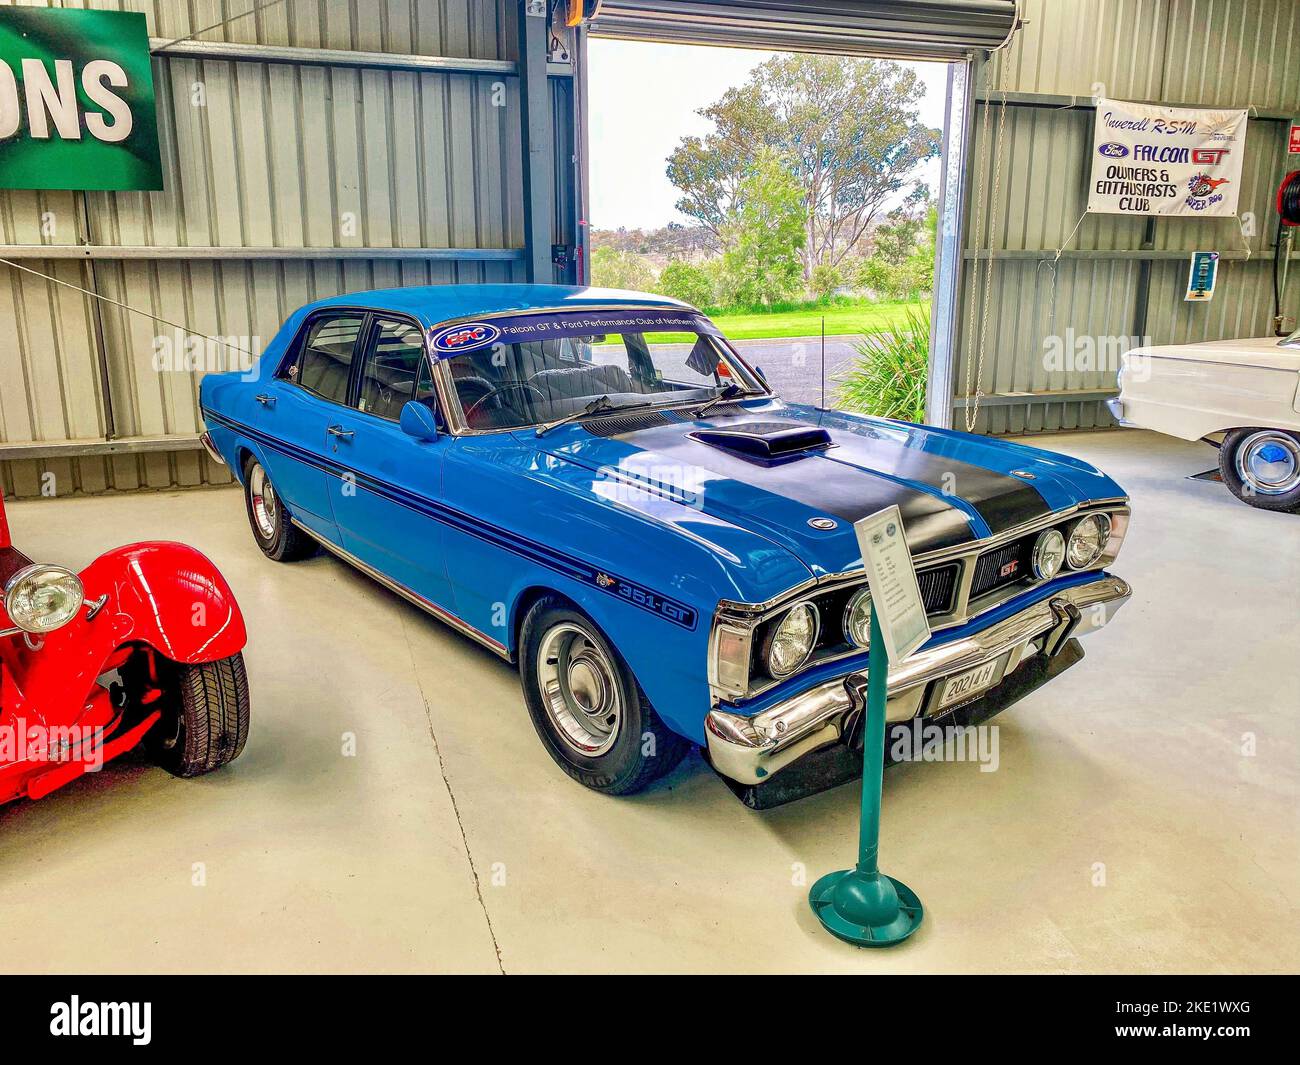 A Ford Falcon GT 351 classic car displayed at the National Transport Museum in Inverell Stock Photo